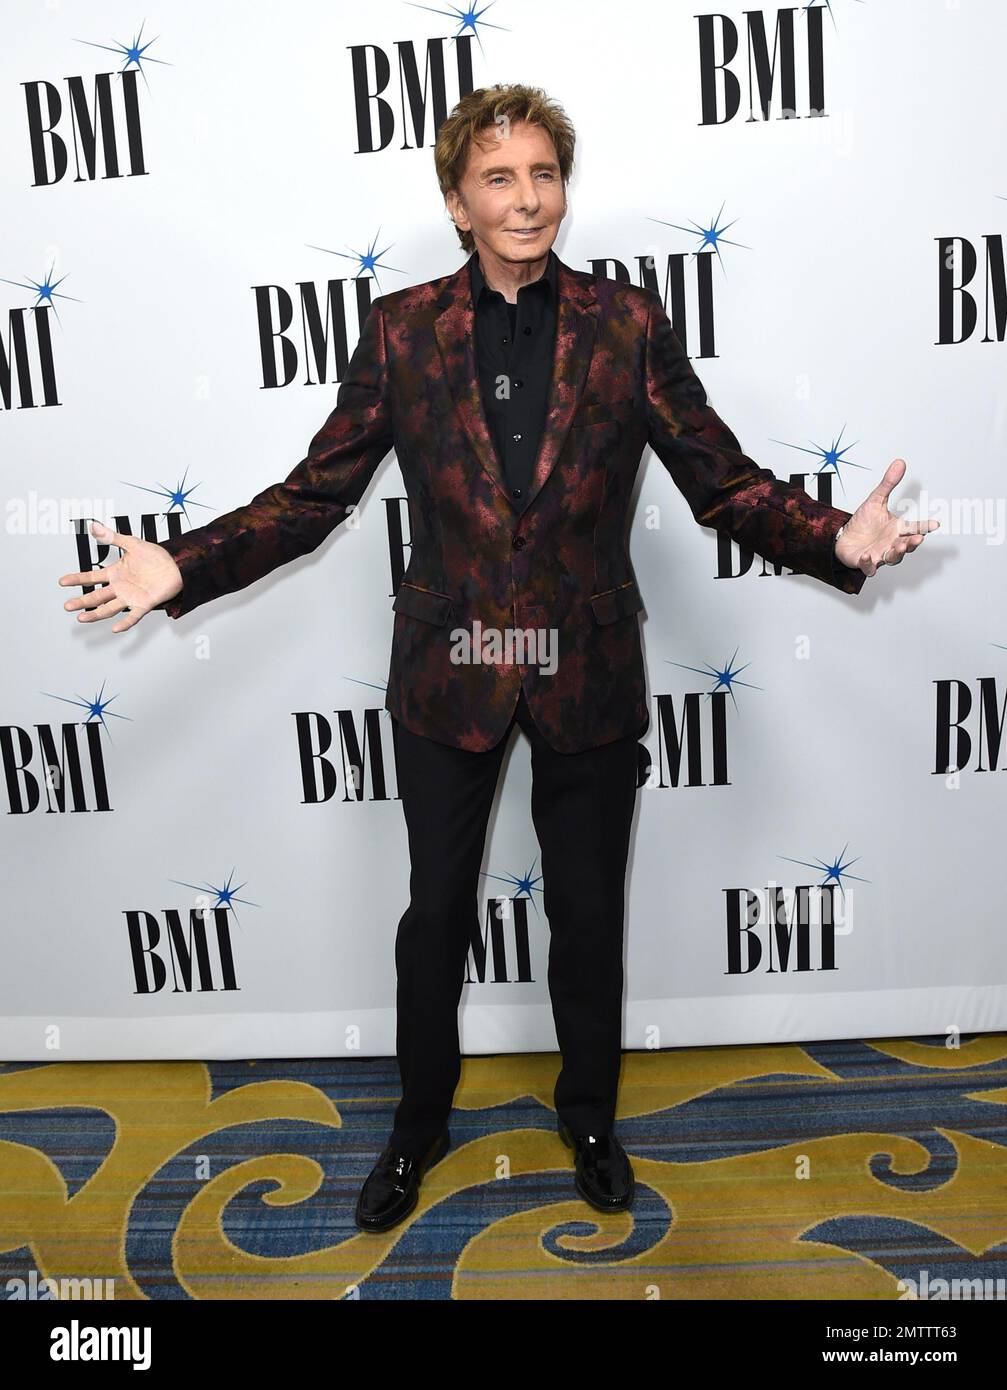 Barry Manilow arrives at the 65th annual BMI Pop Awards at the Beverly ...